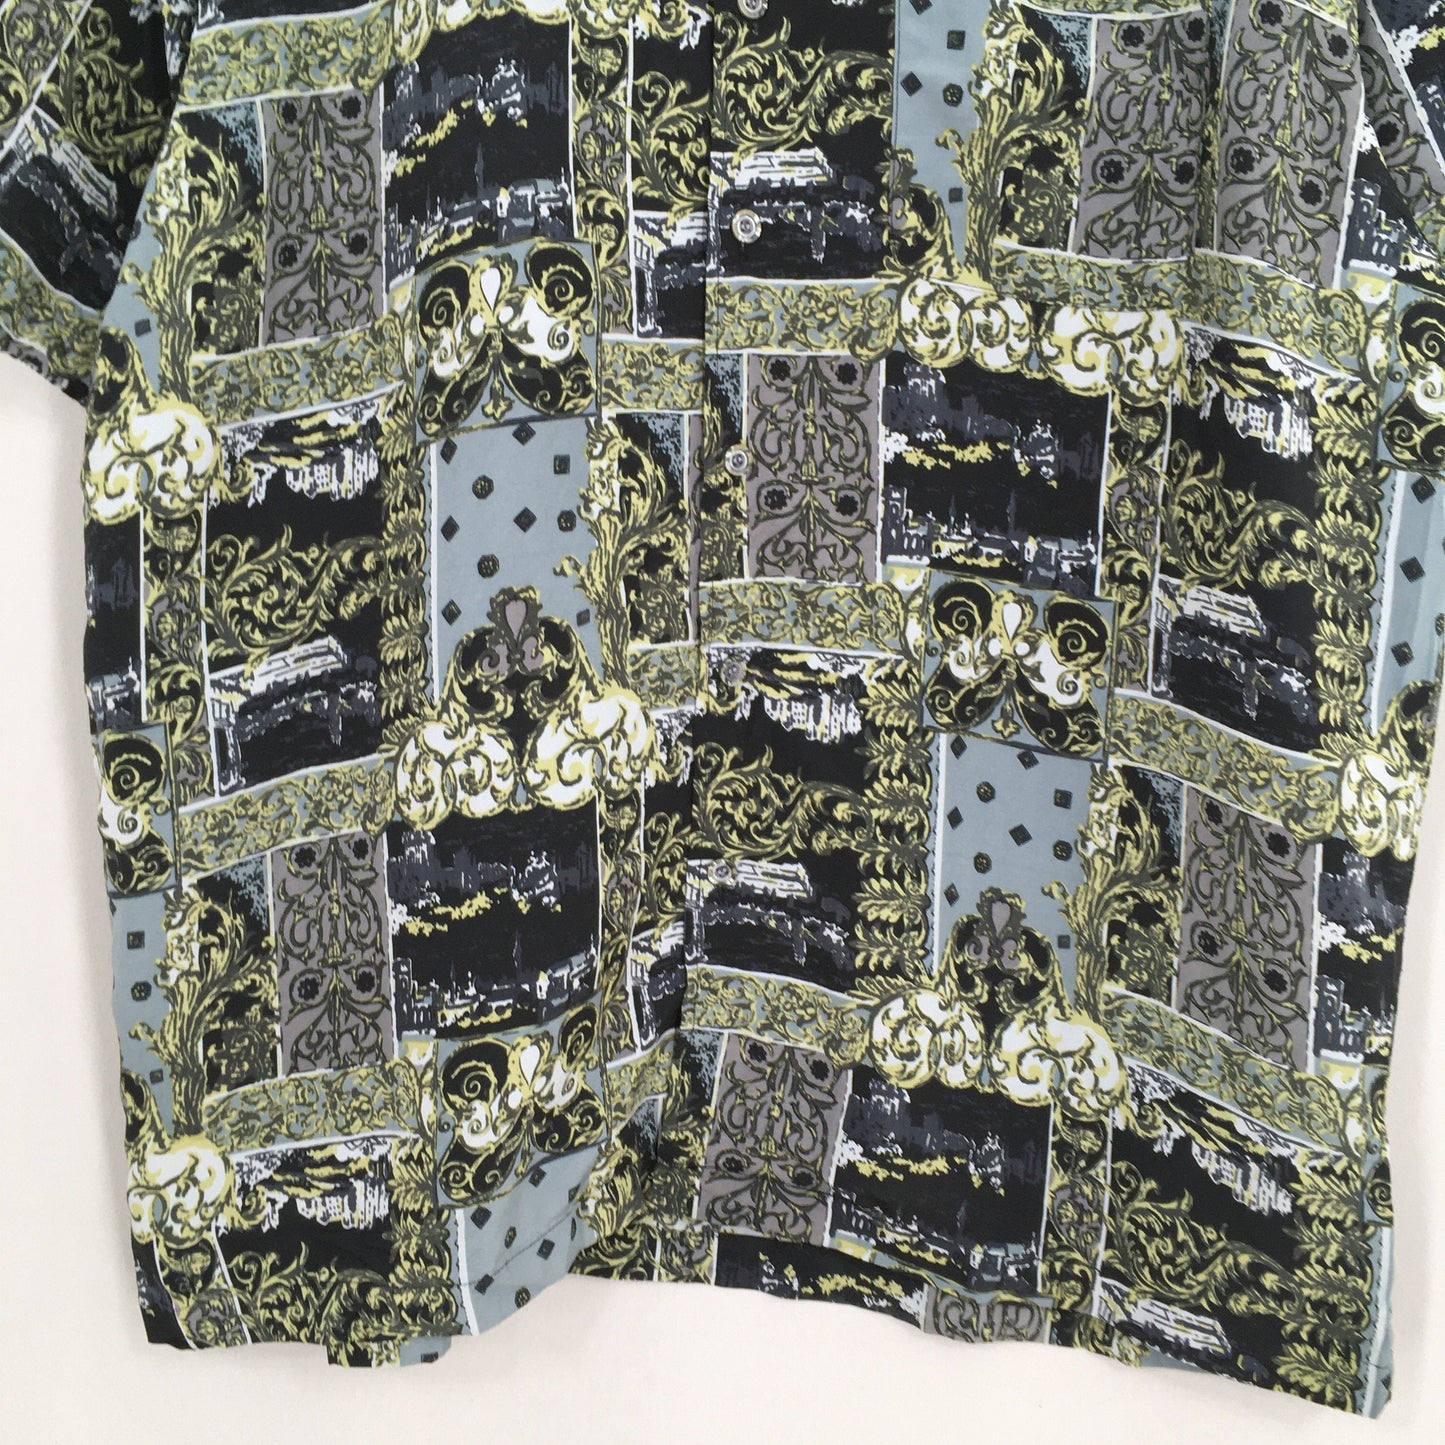 Baroque Abstract Pattern Shirt Large